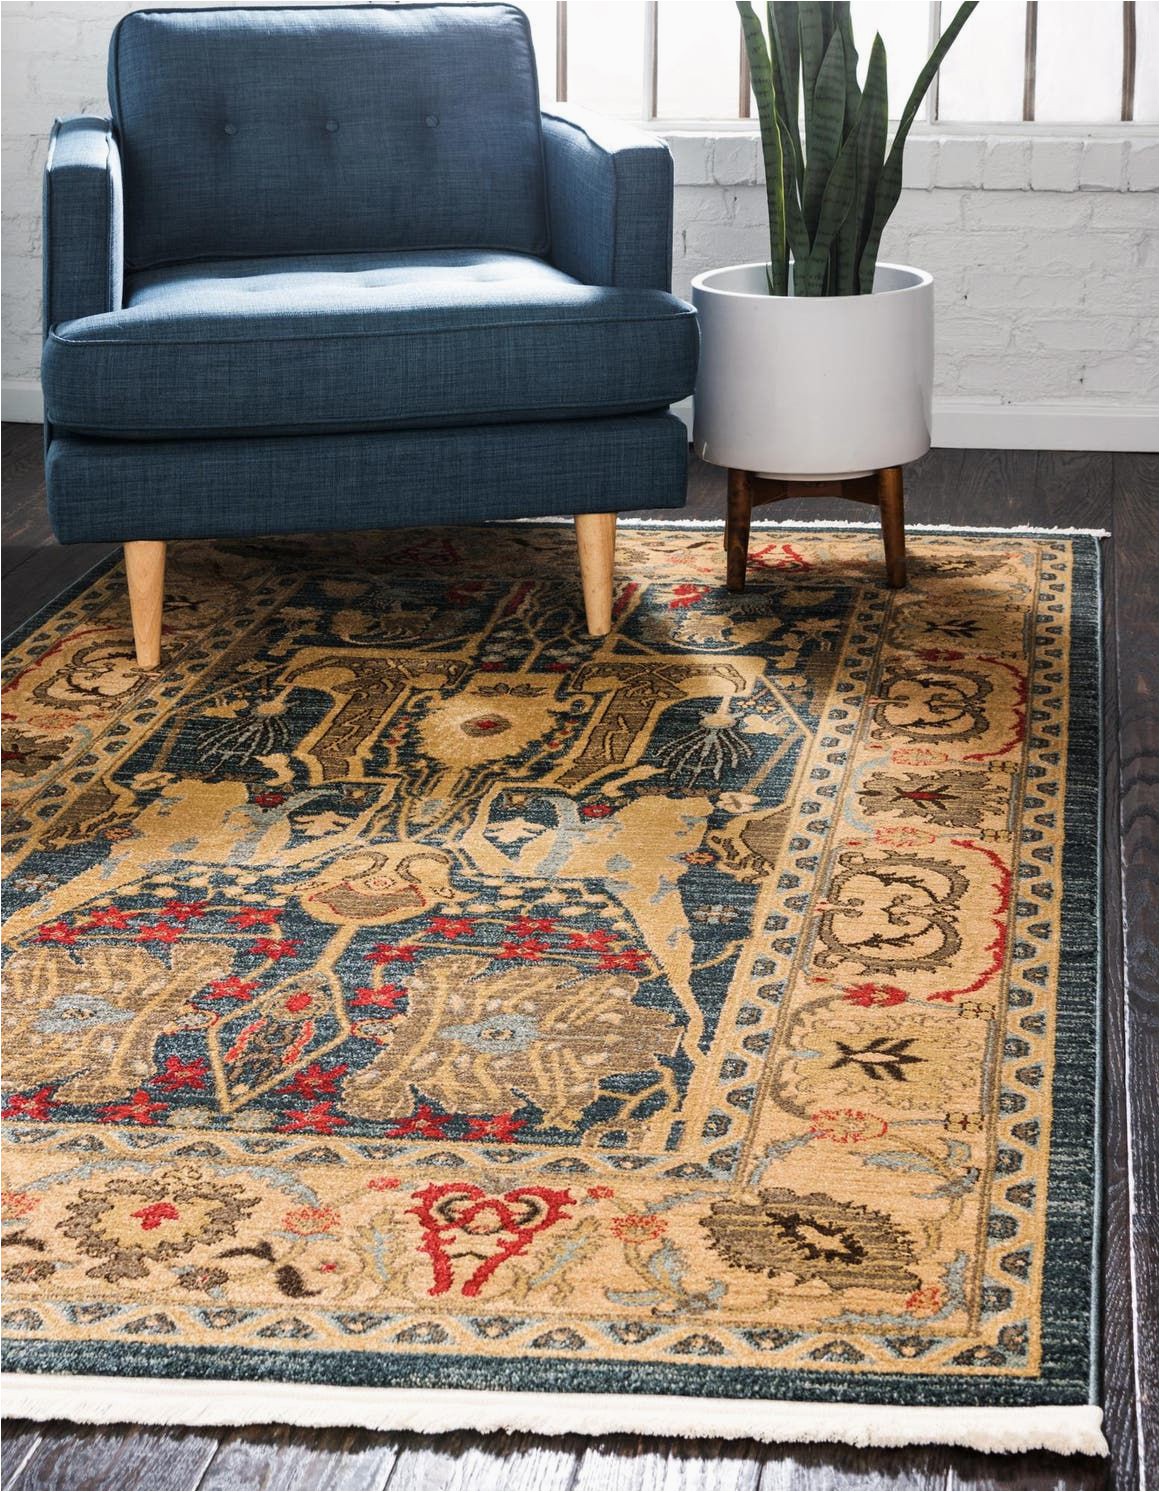 12×16 area Rugs Near Me Sara Navy Blue 12×16 area Rug In 2020